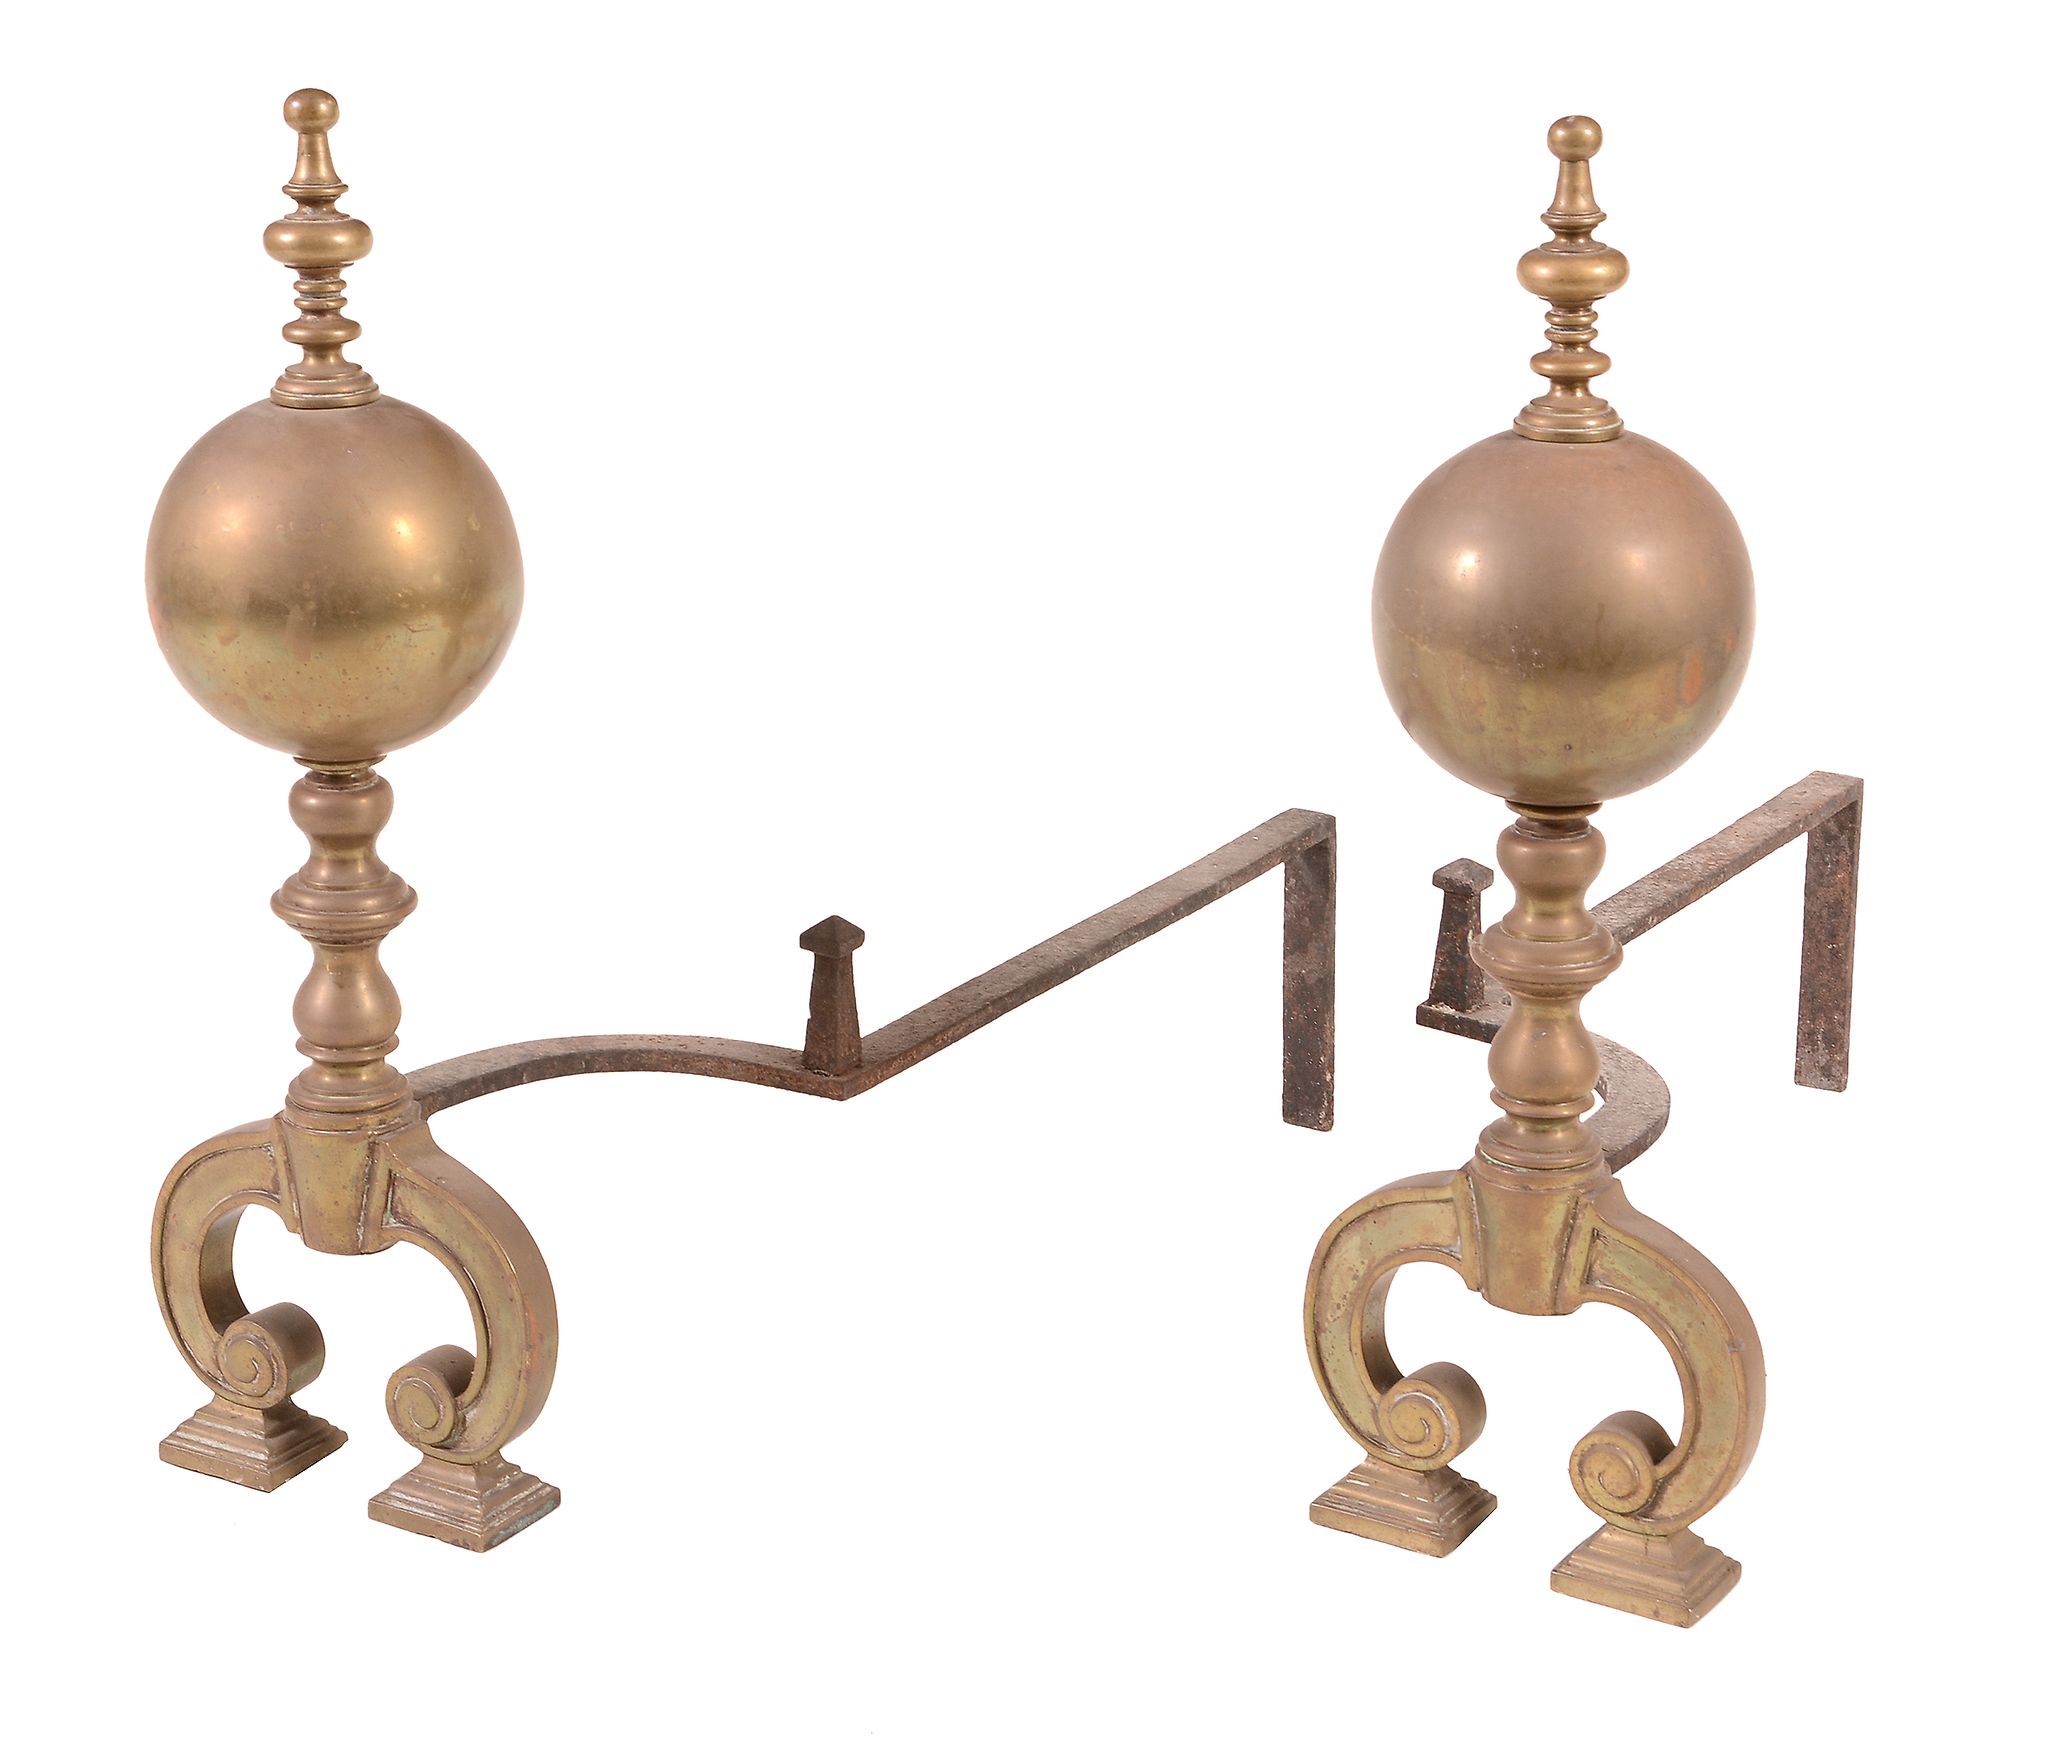 A pair of brass and wrought iron mounted andirons, early 18th century  A pair of brass and wrought